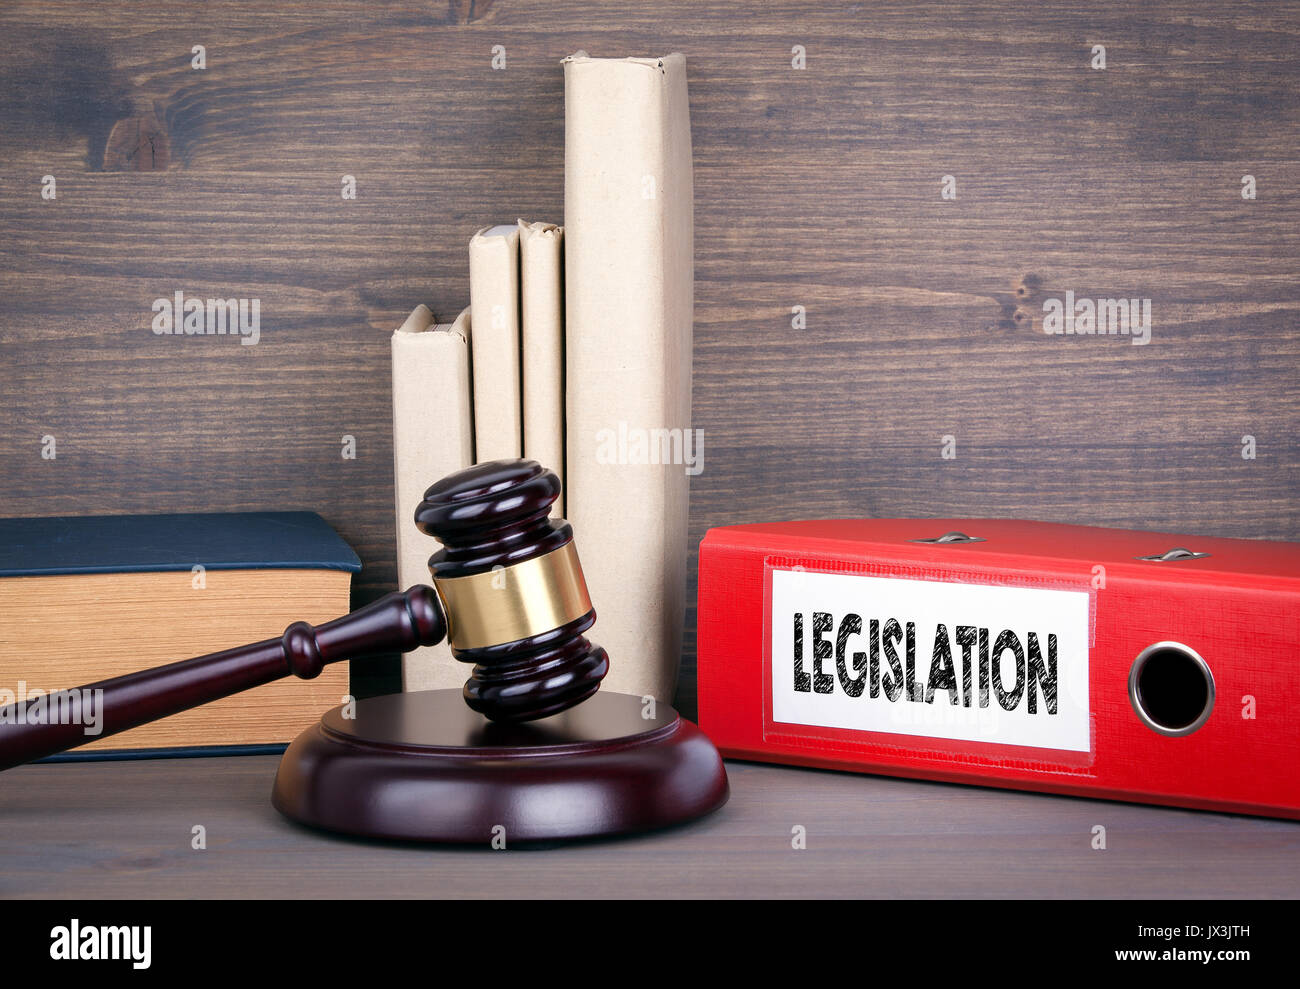 Legislation. Wooden gavel and books in background. Law and justice concept. Stock Photo